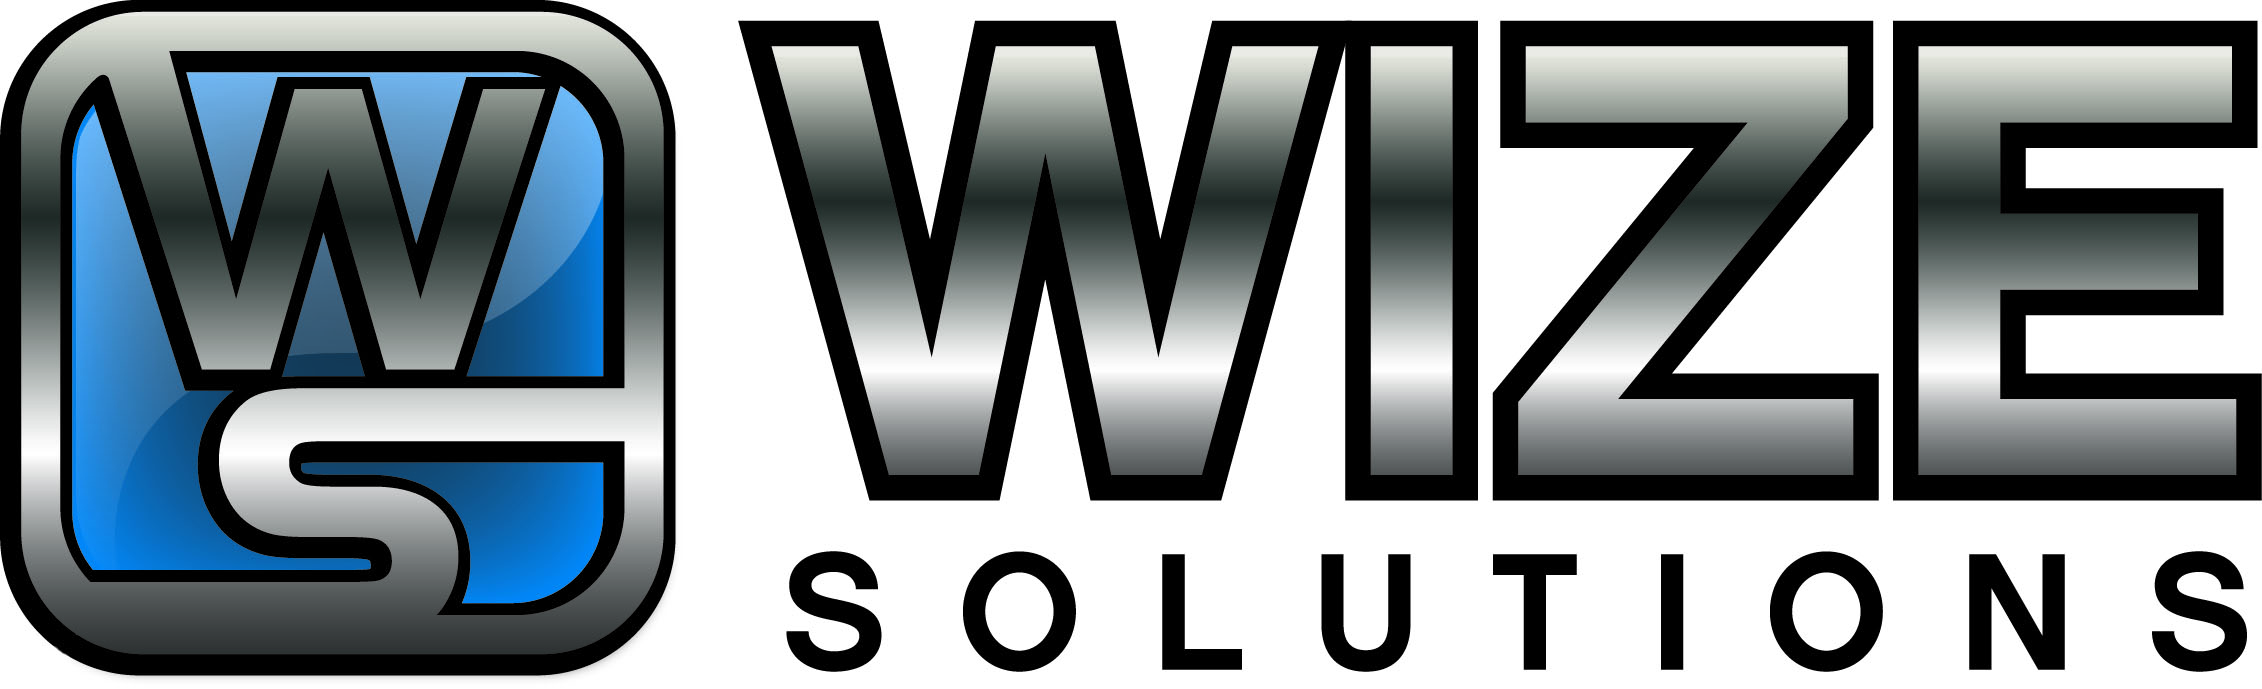 Wize Solutions Logo